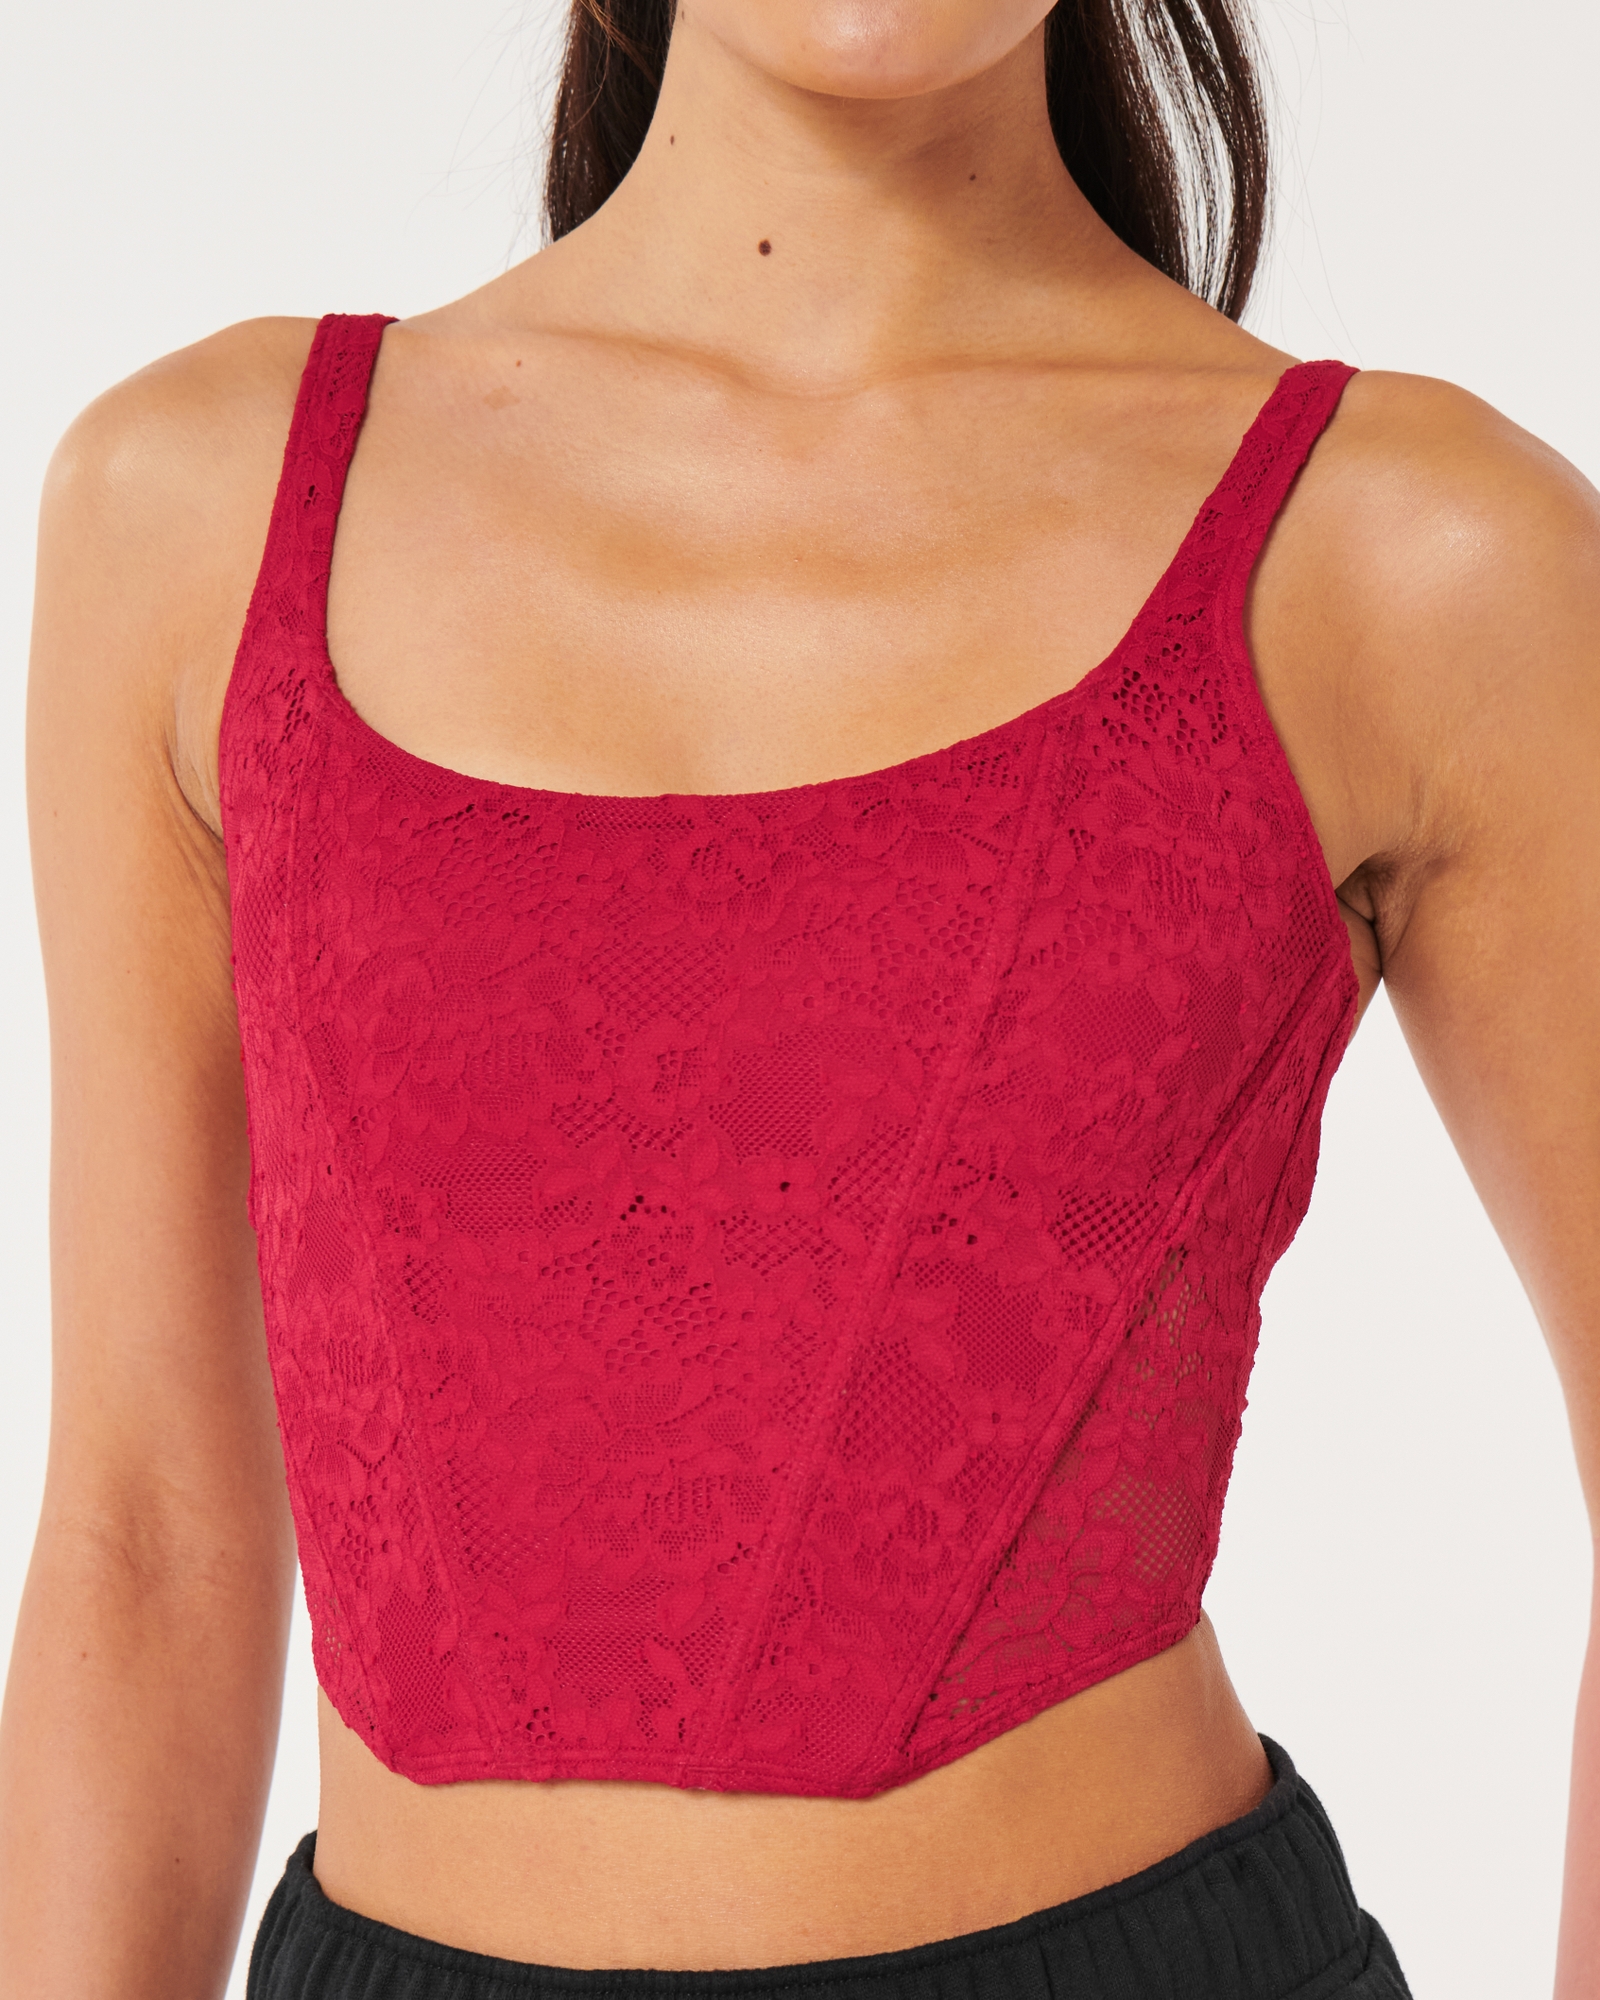 Women's Gilly Hicks Recharge Lace-Up Back Corset, Women's Bras & Underwear